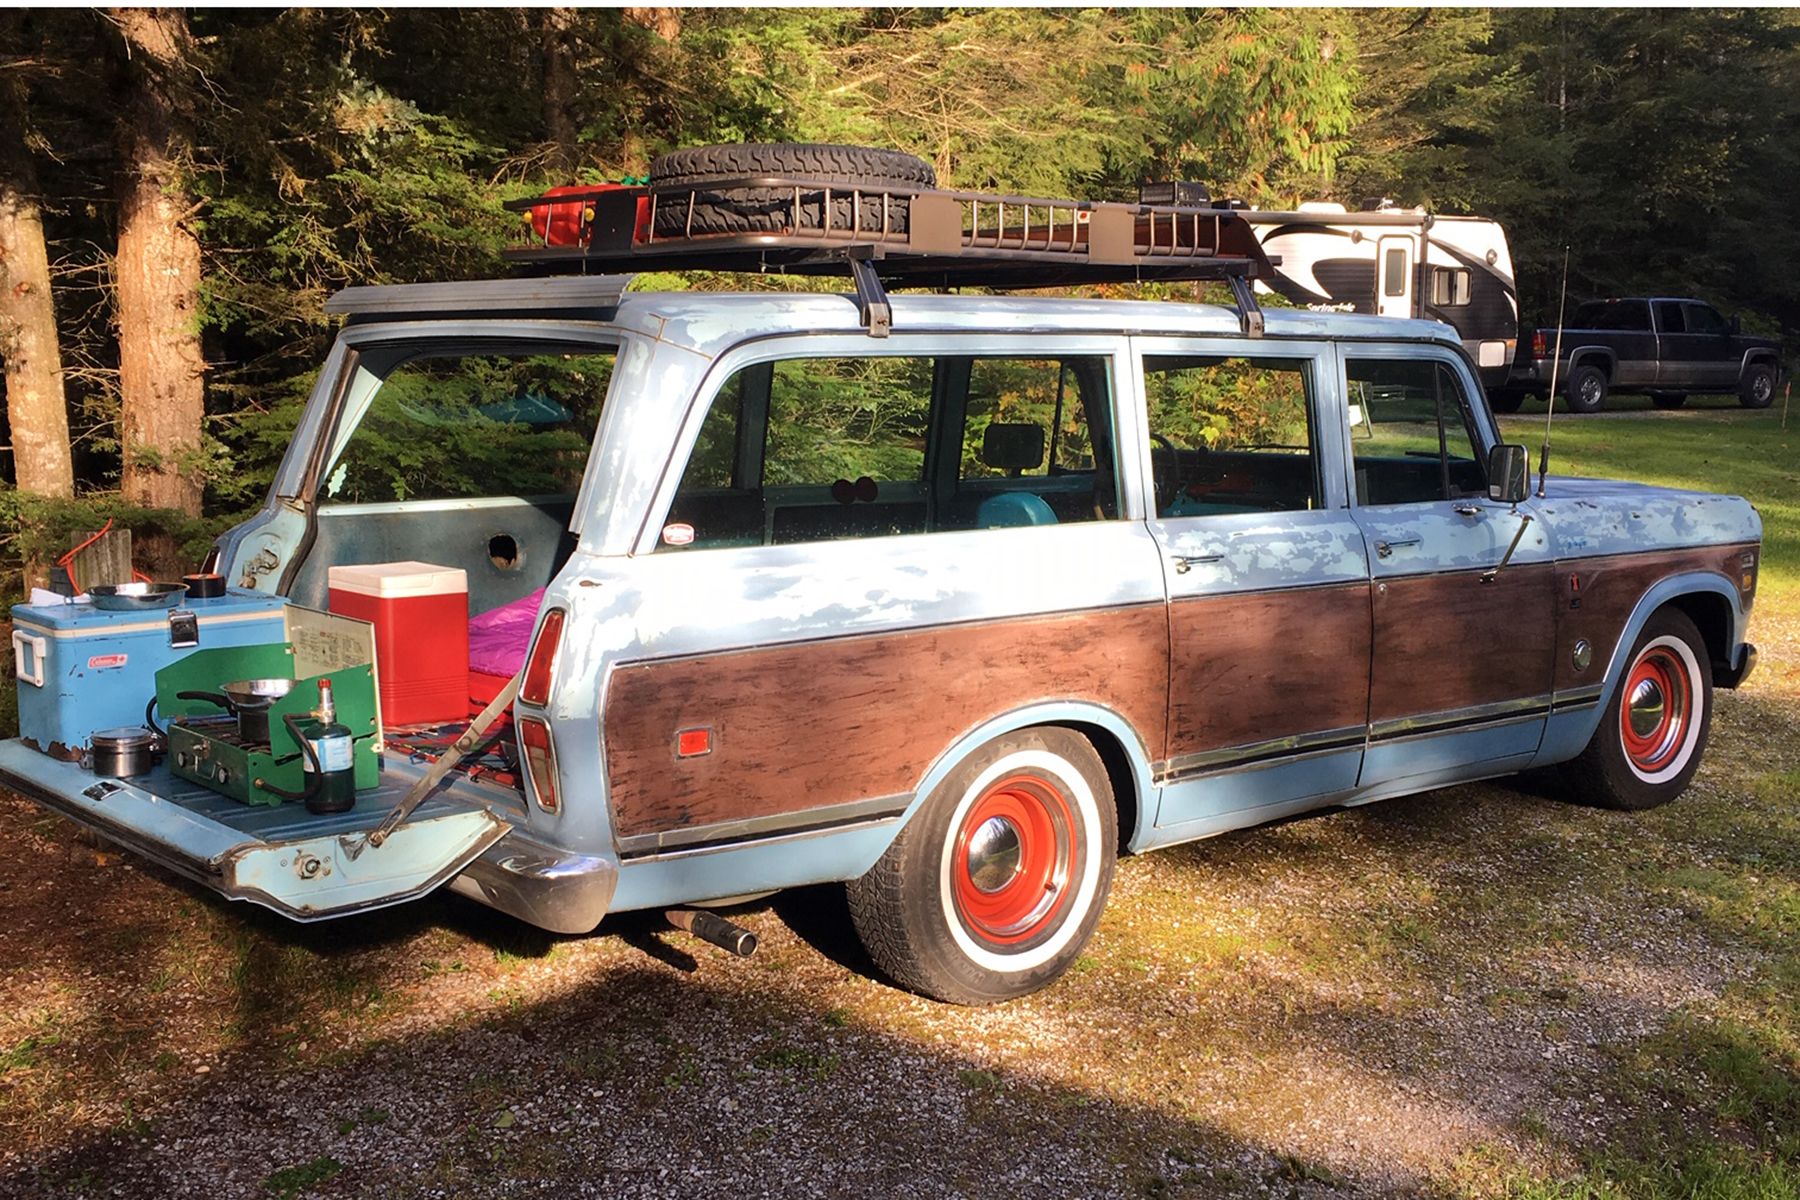 The original Chevy Suburban Carryall was a heavy-duty passenger car that  foreshadowed crossovers